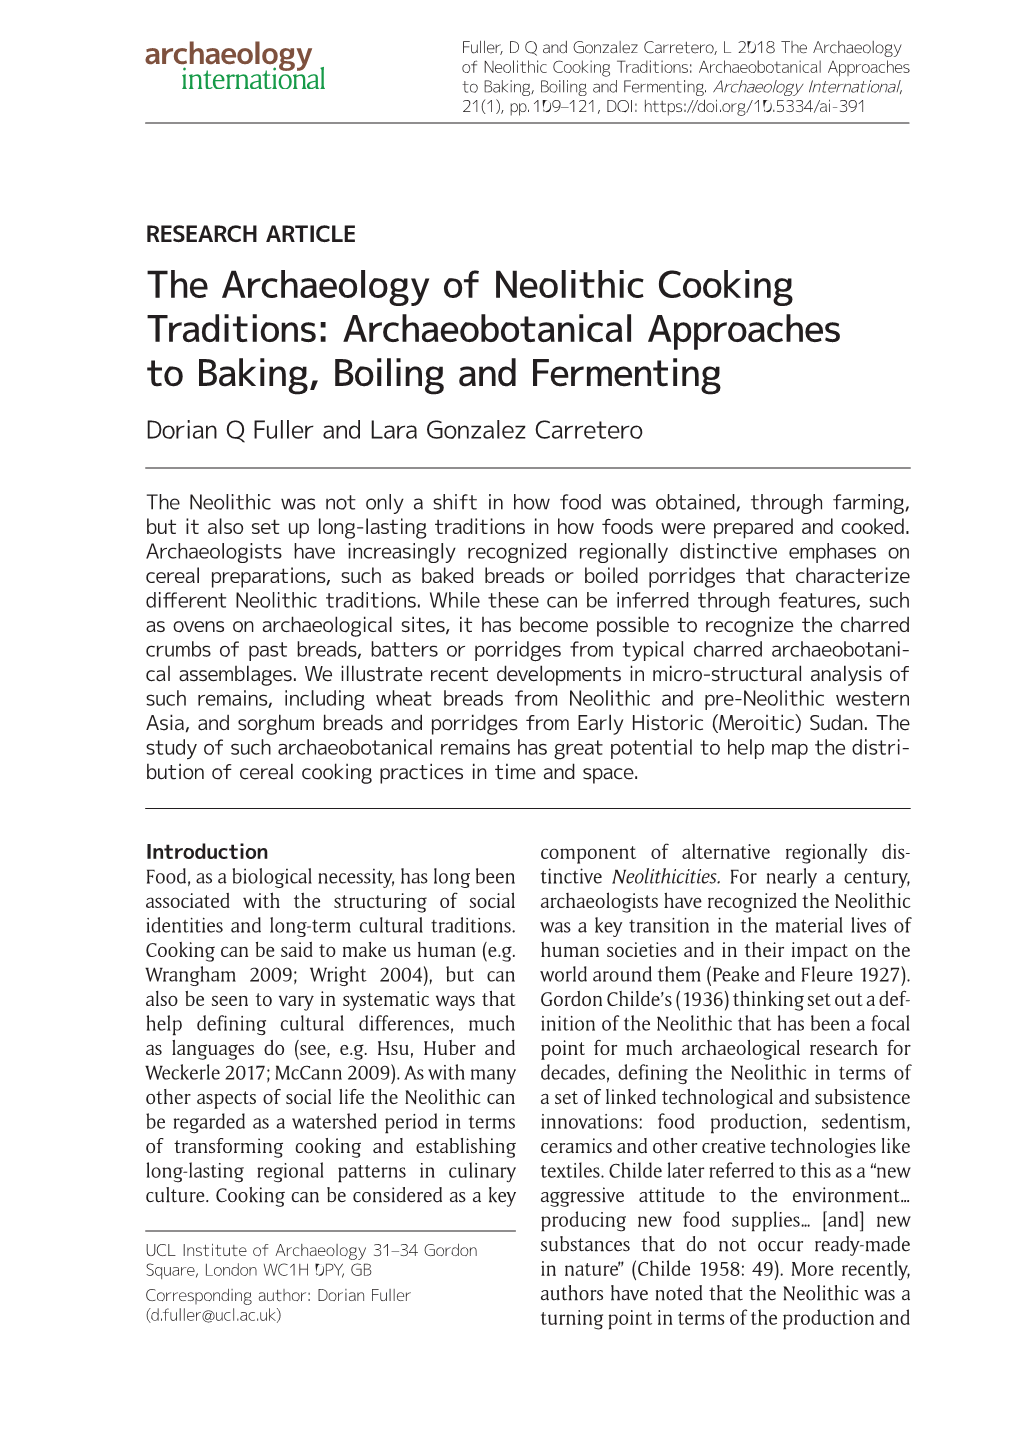 The Archaeology of Neolithic Cooking Traditions: Archaeobotanical Approaches to Baking, Boiling and Fermenting